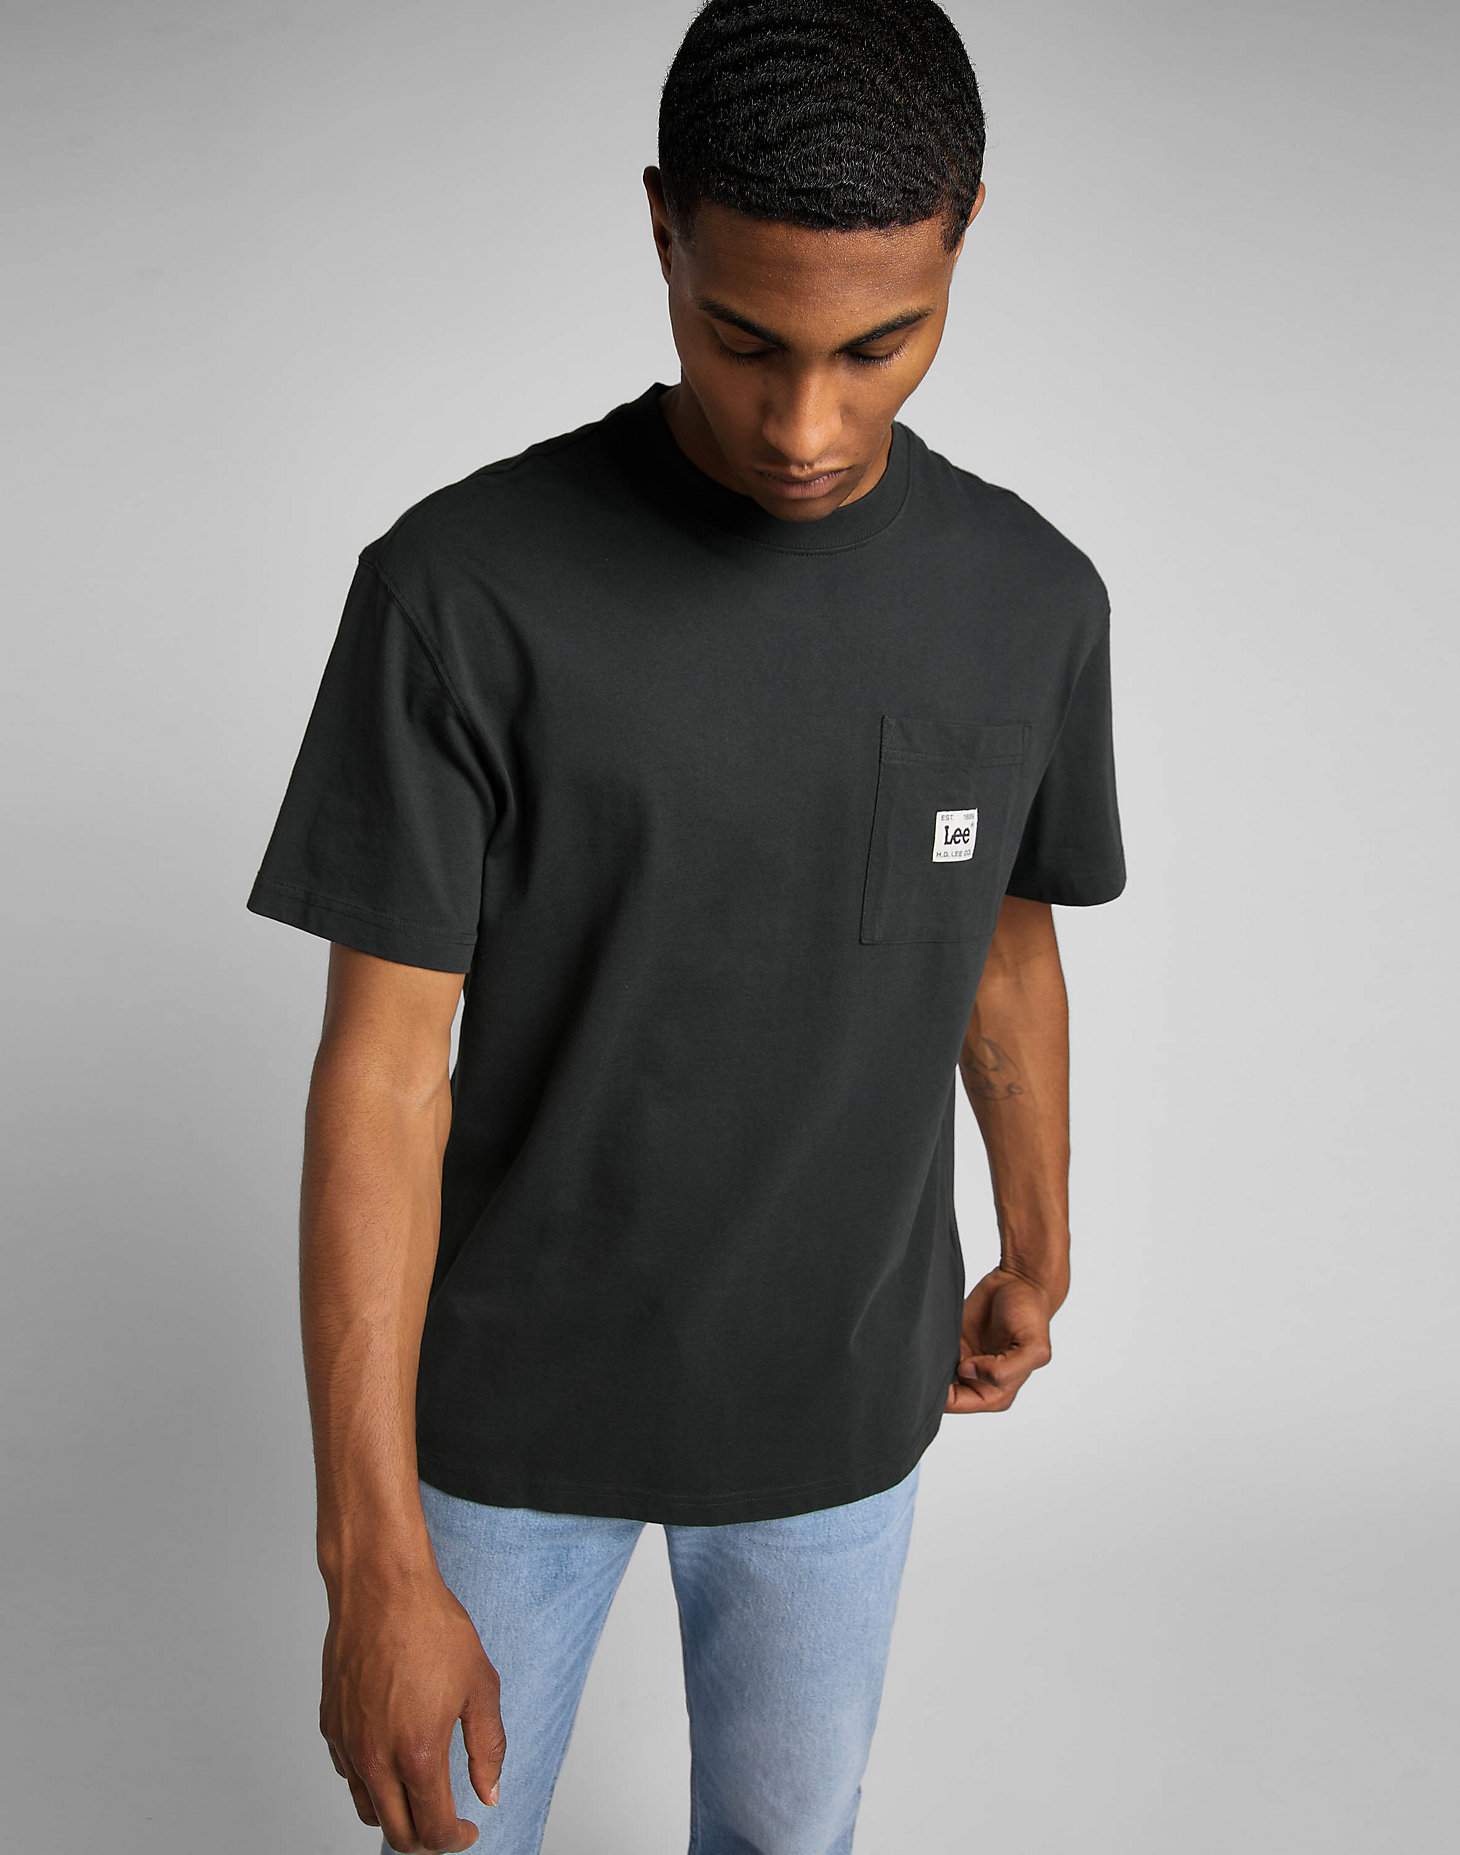 Loose Pocket Tee in Washed Black alternative view 4